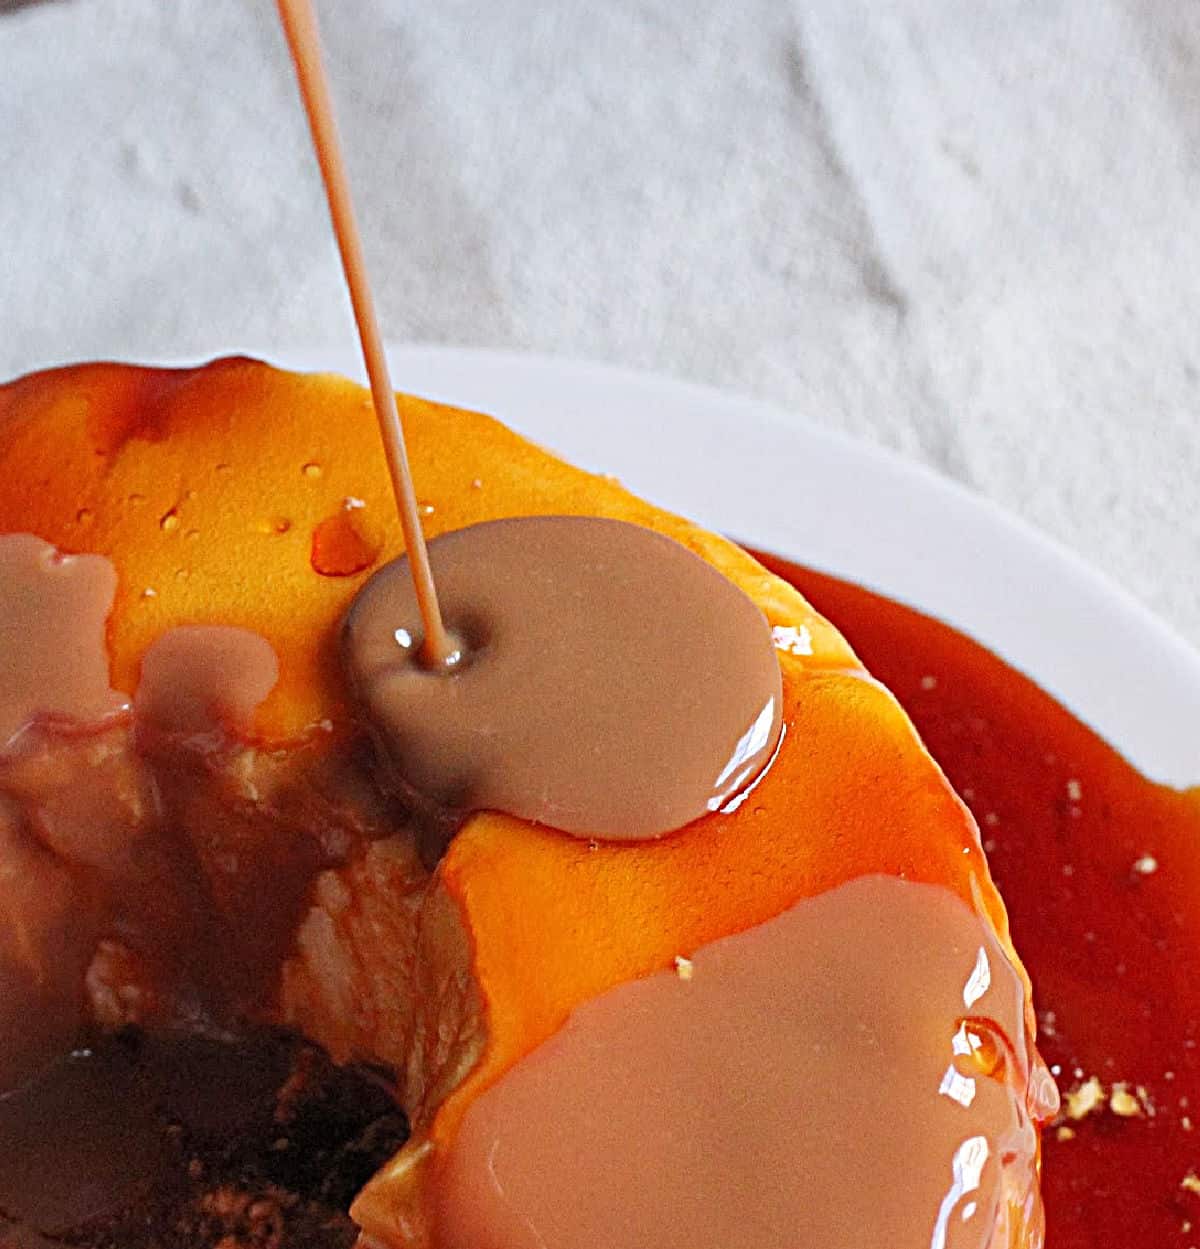 Pouring dulce de leche sauce on caramel floating island dessert; whitish cloth underneath